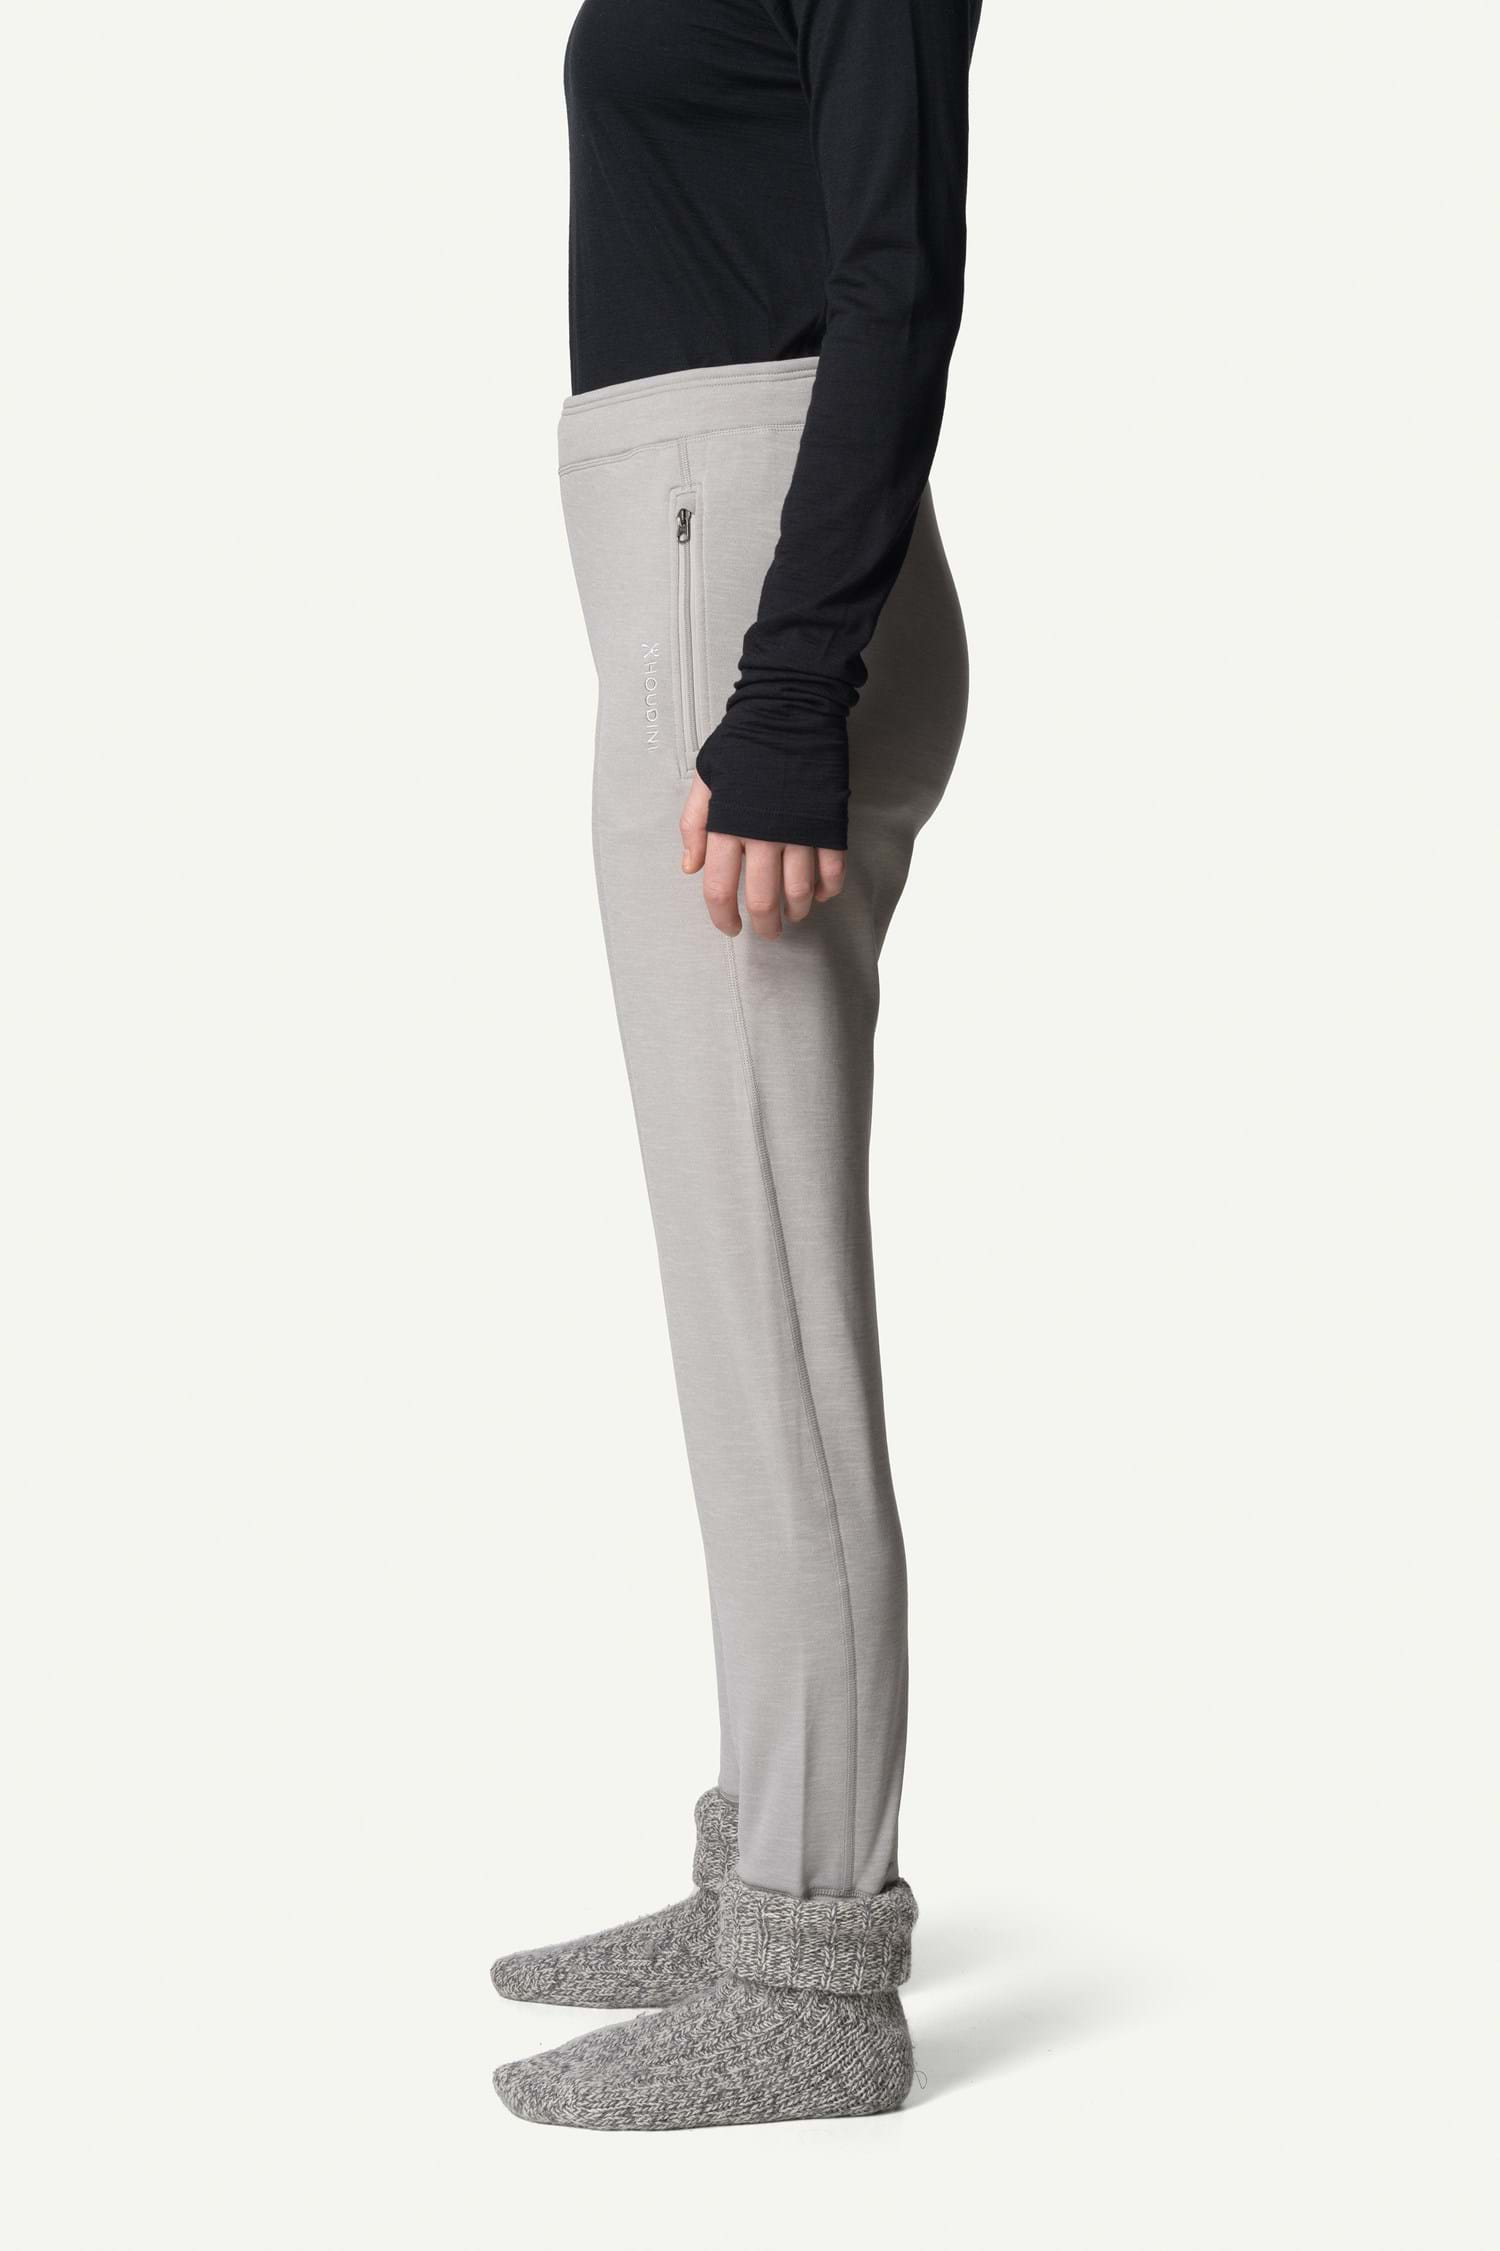 Buy Black Track Pants for Women by Outryt Online